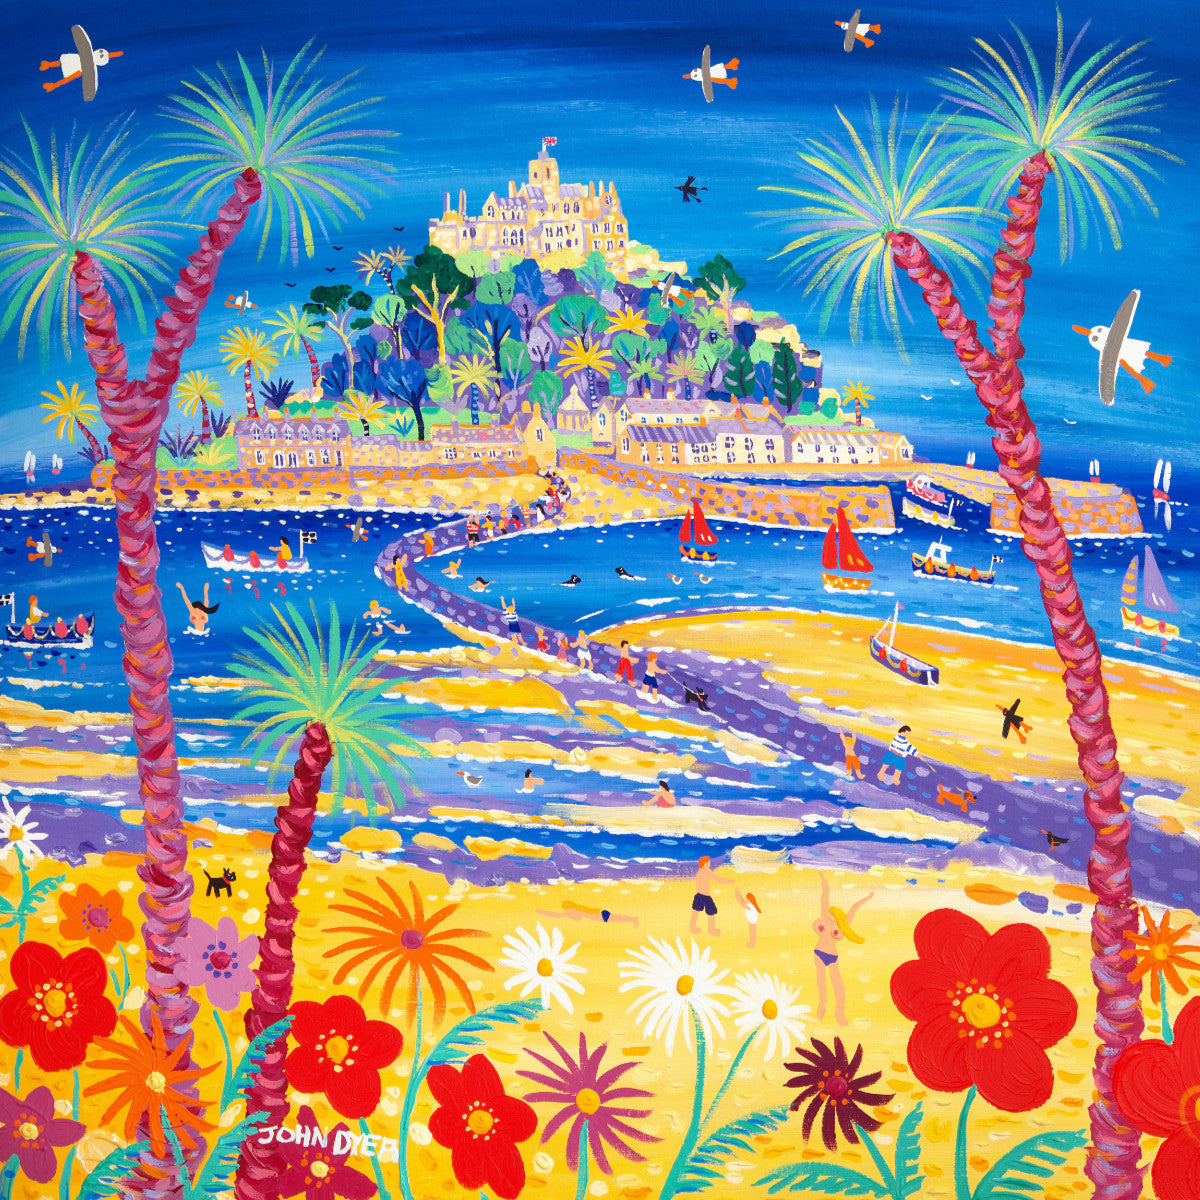 Signed Limited Edition Print by Cornish Artist John Dyer. 'Incoming Tide, St Michael's Mount'. Cornwall Art Gallery Print